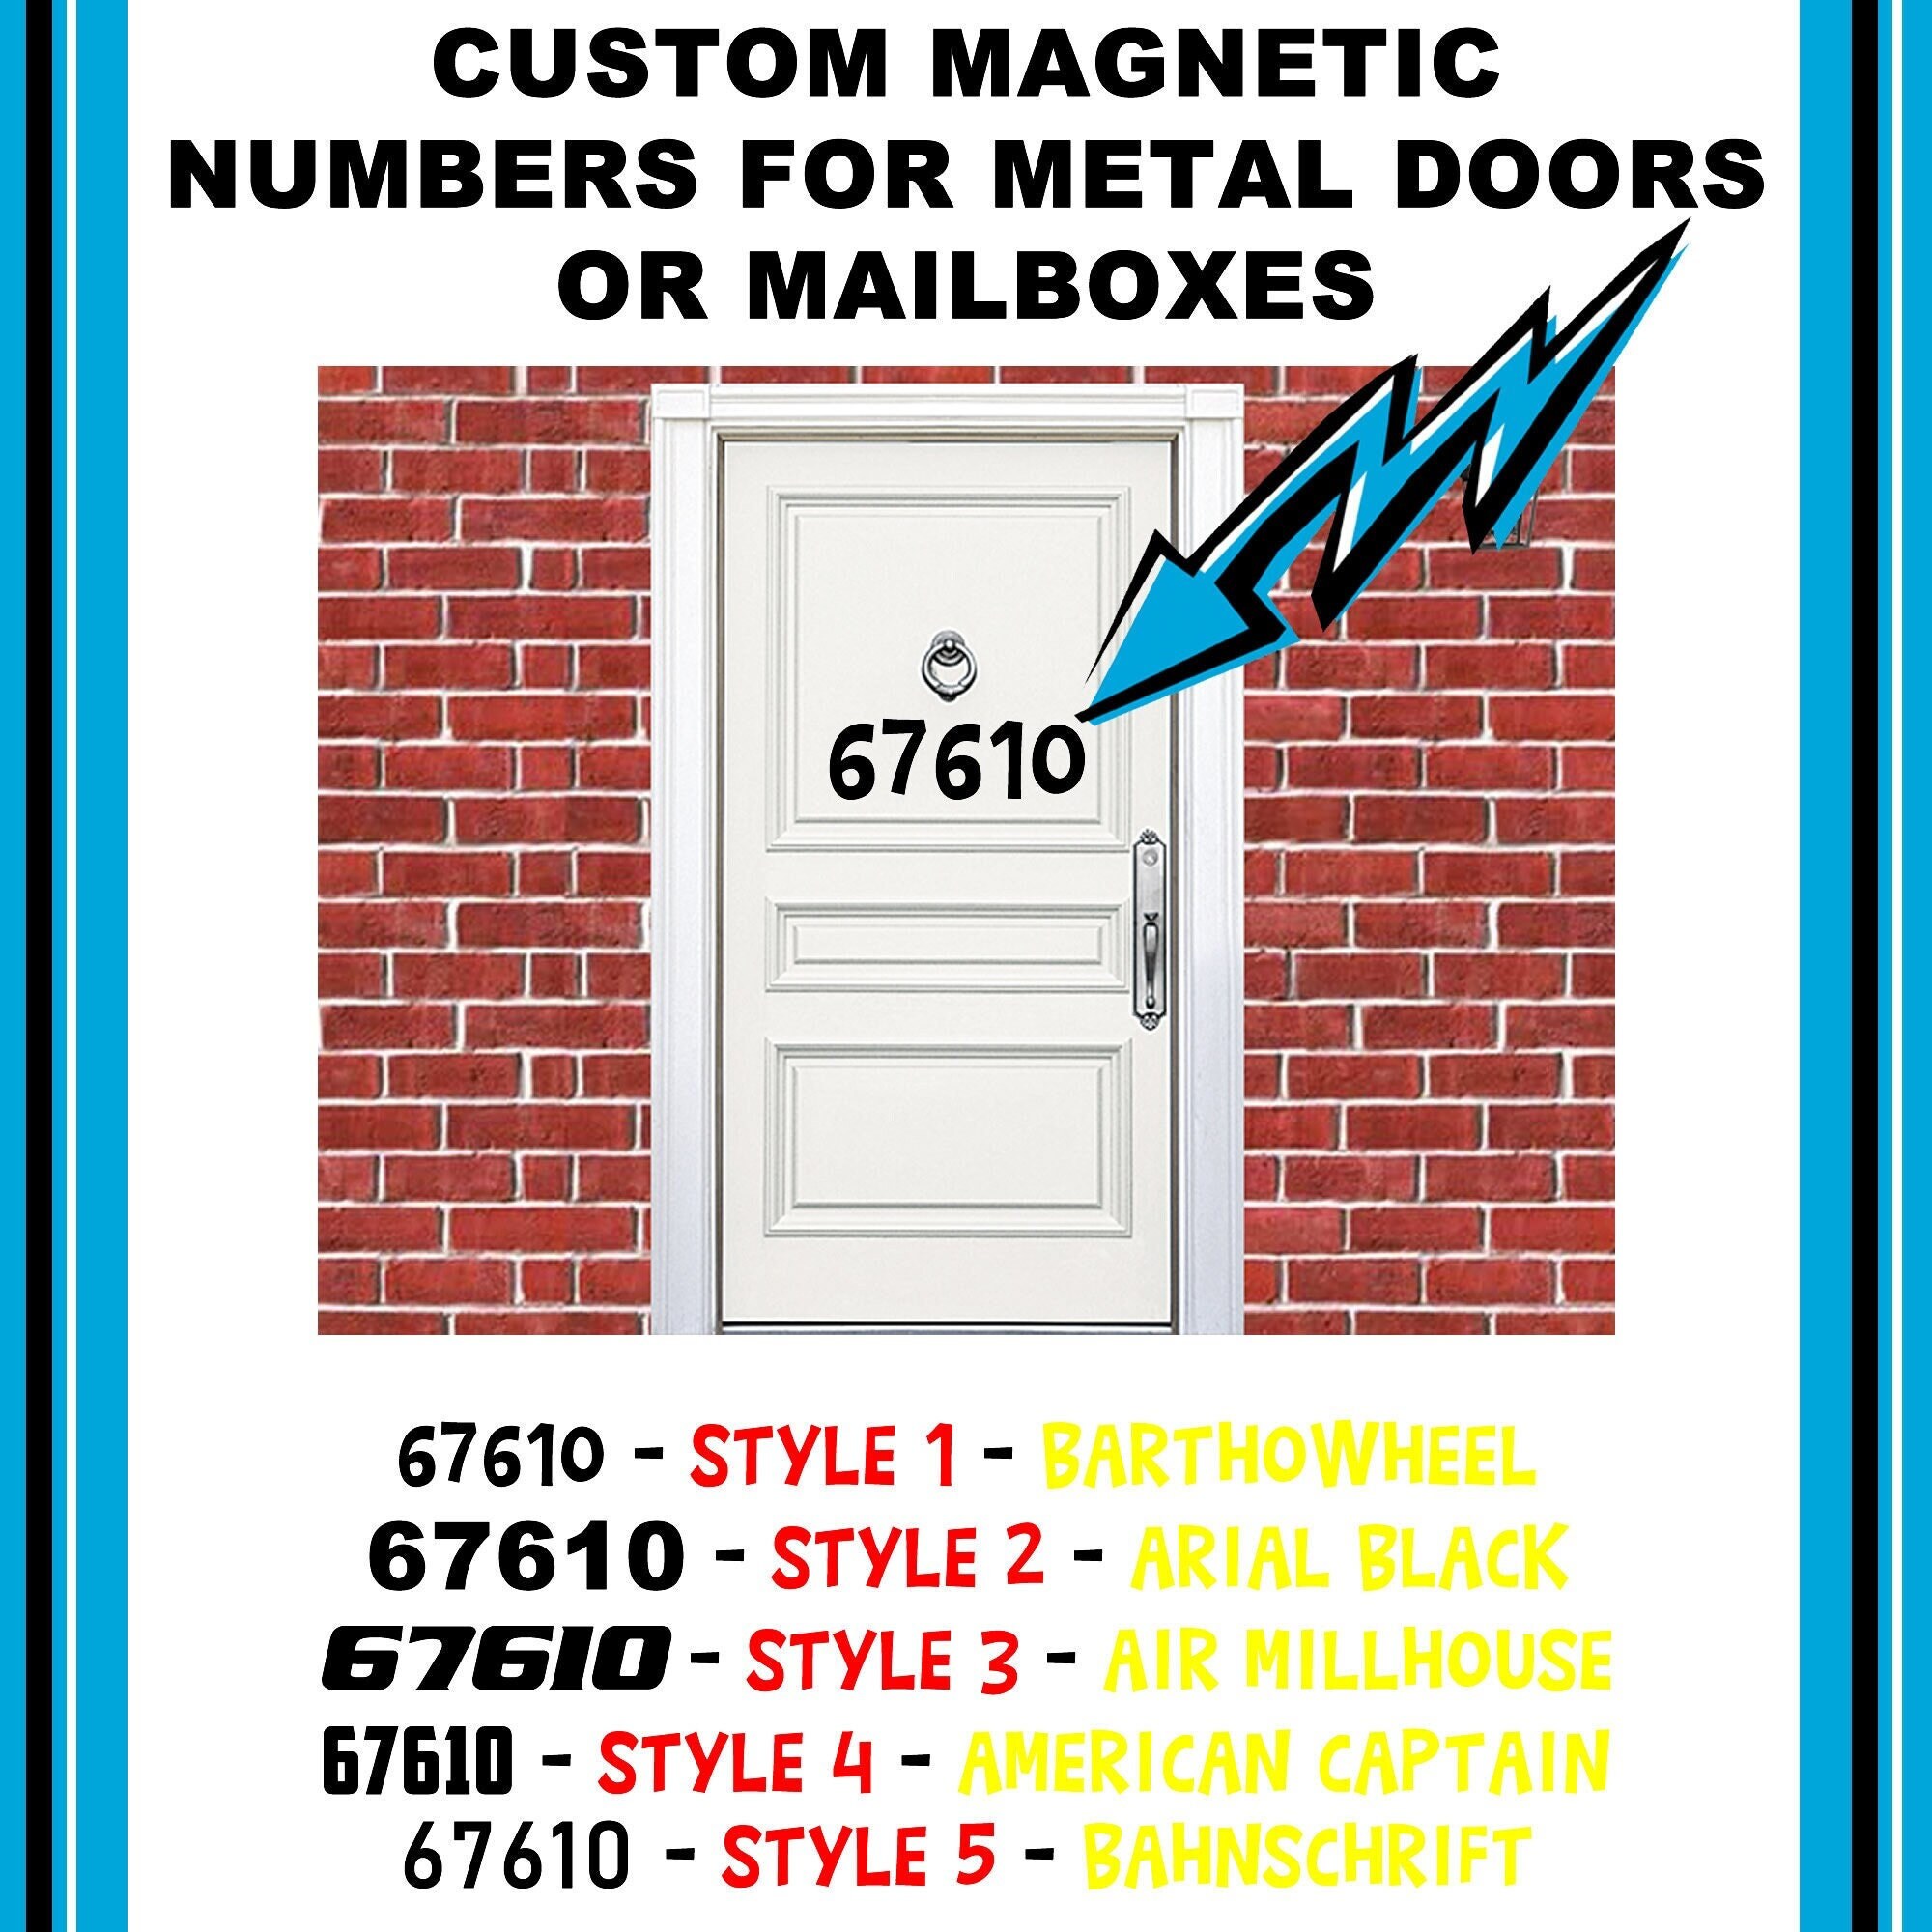 Yellow Reflective Up to 5 Numbers custom magnet in various font style for front doors, mailboxes, garage door, sizes up to 6 inches high